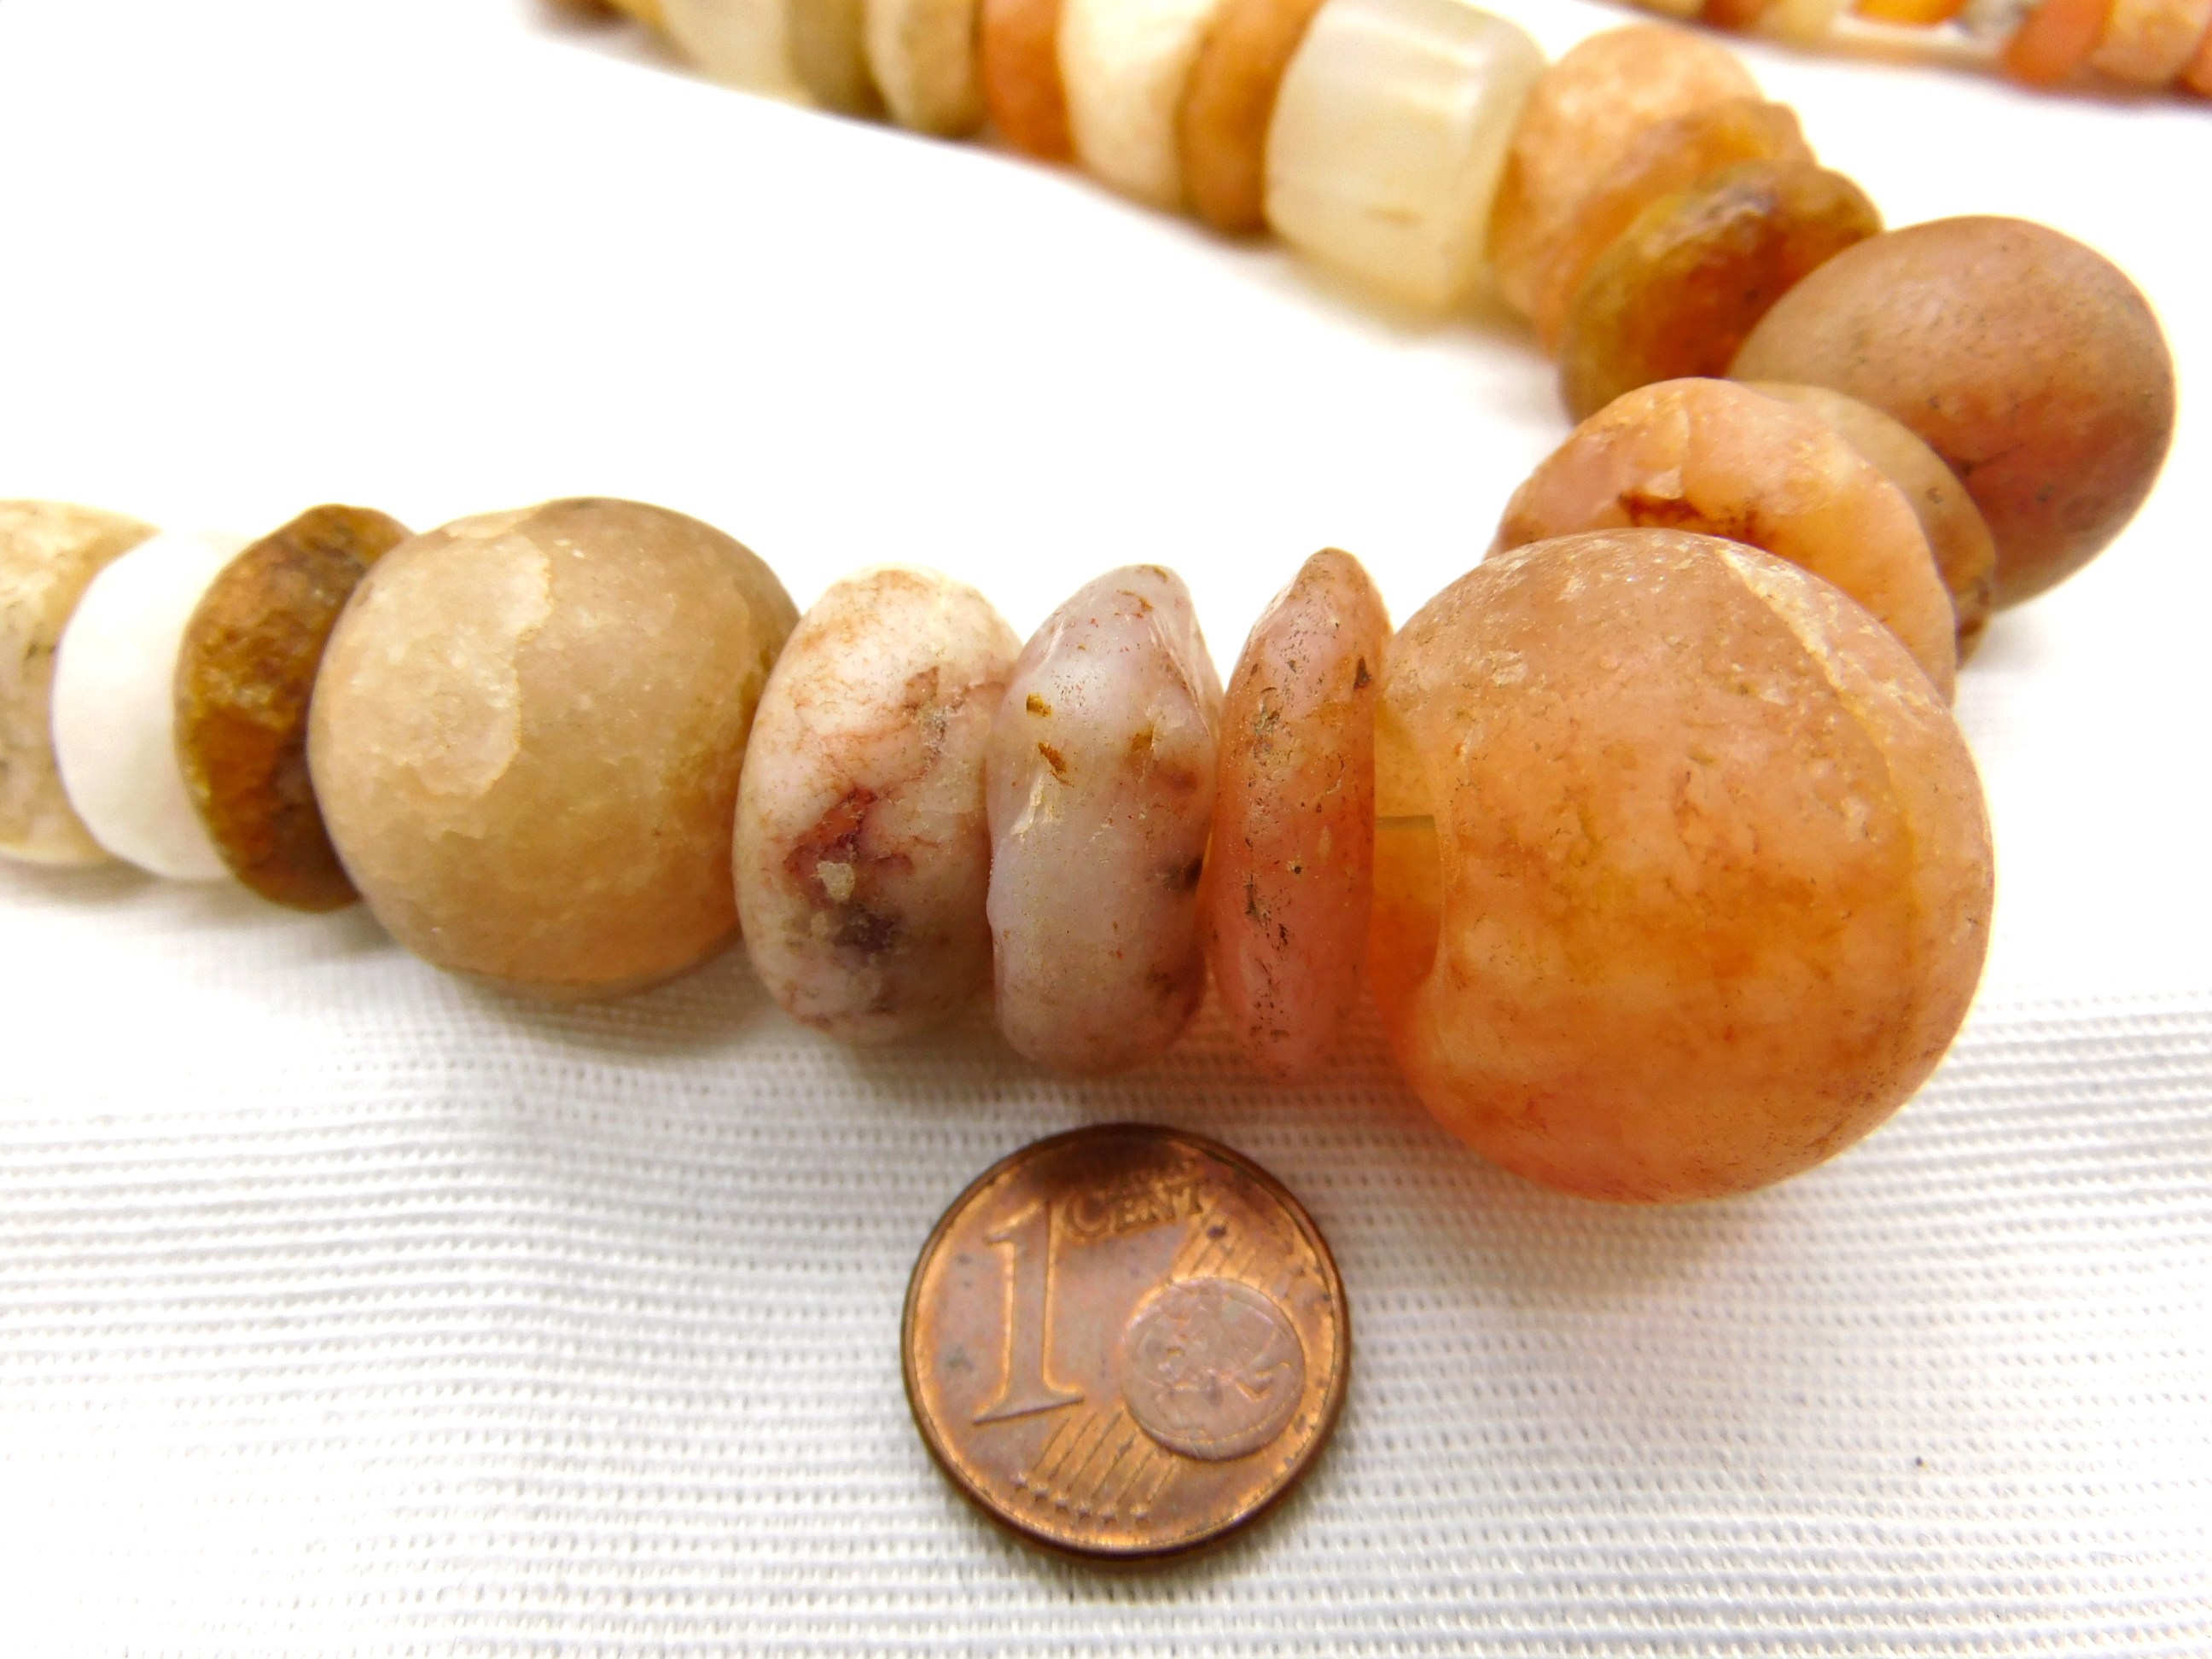 ancient stone beads from the Sahara desert, different stone types and shapes